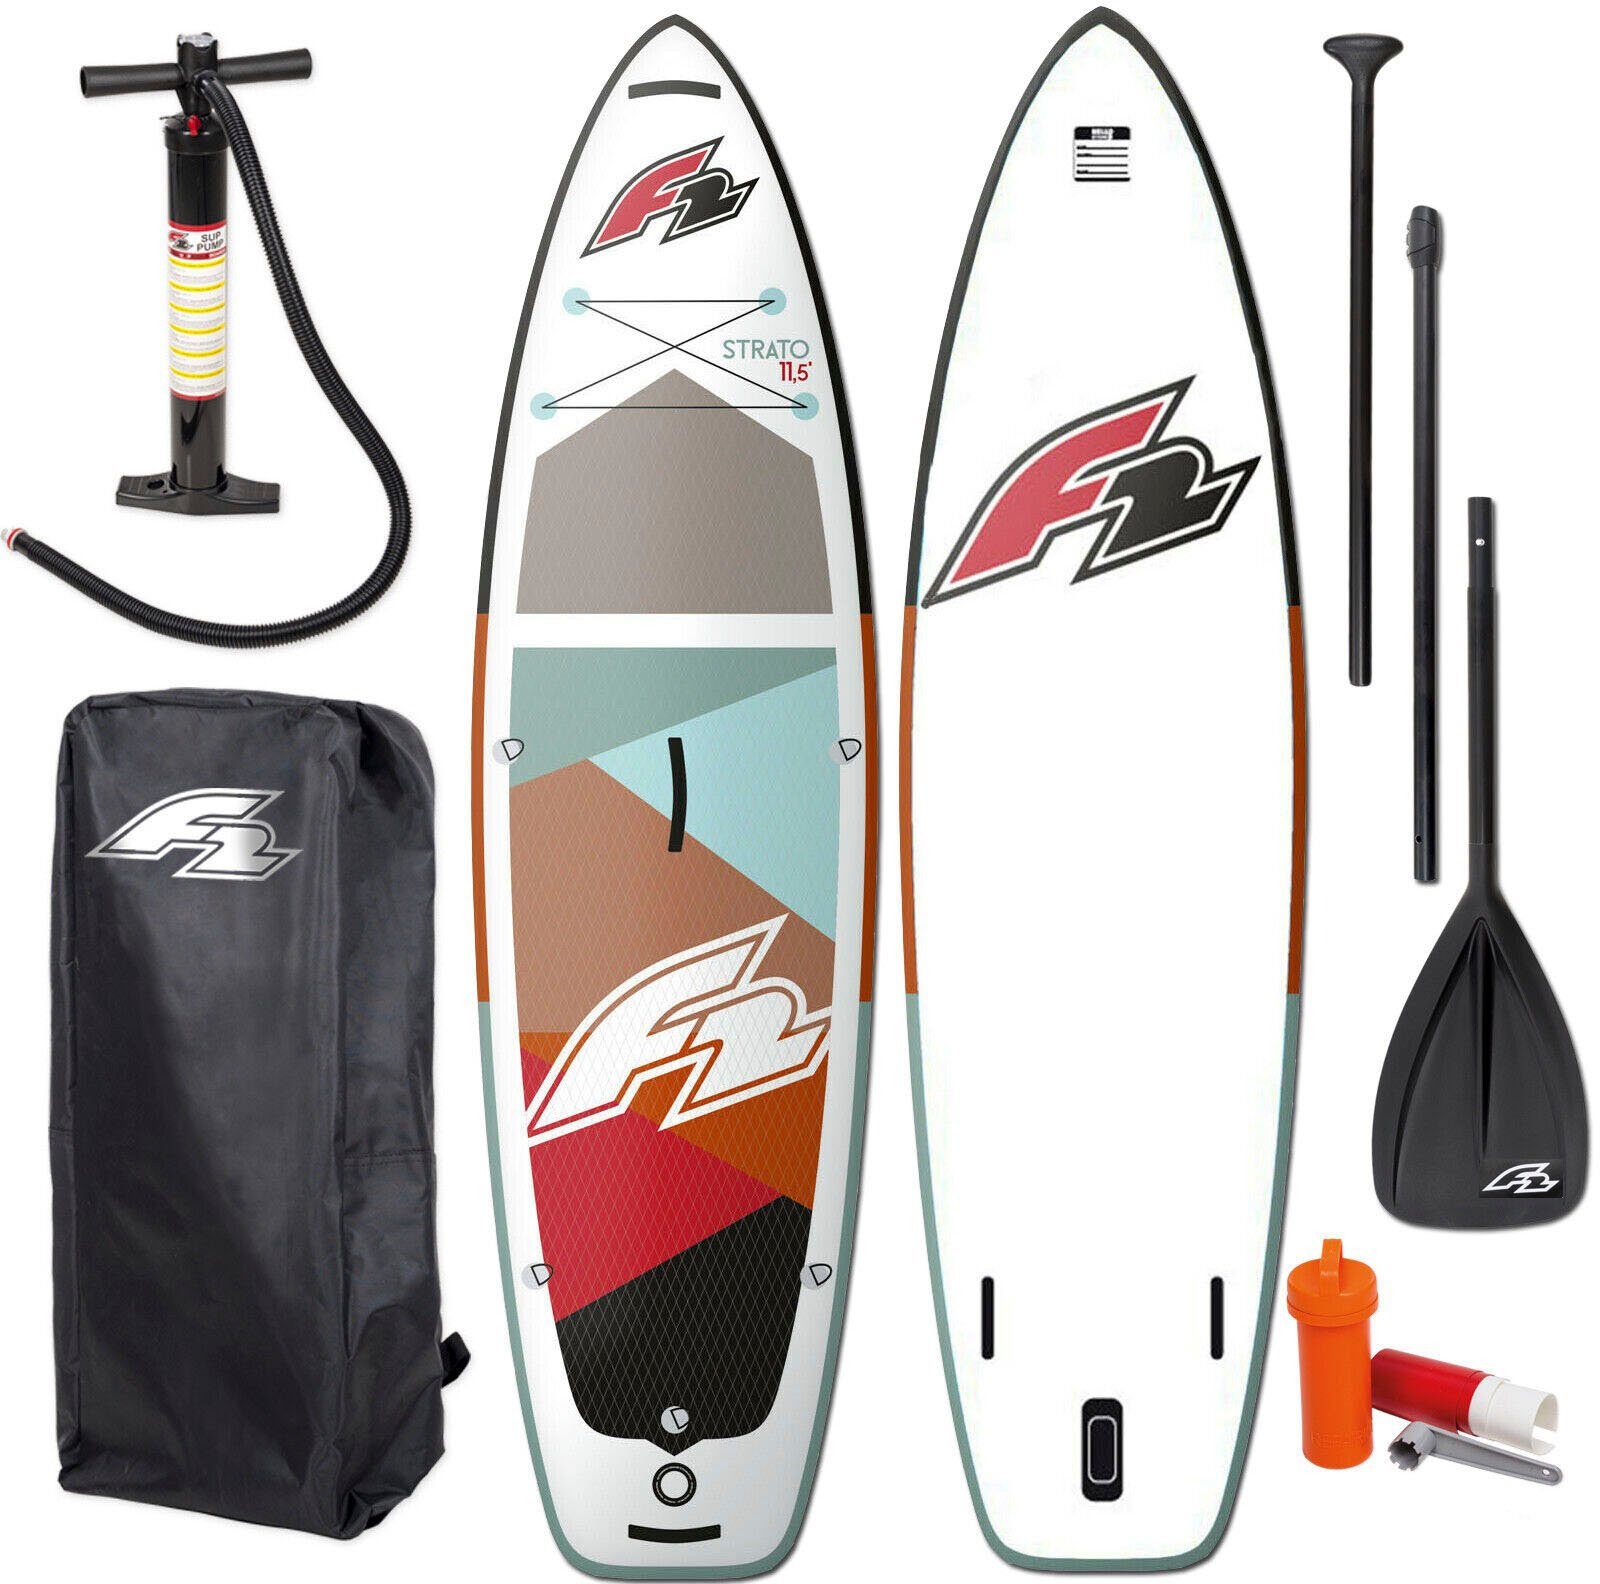 F2 (Packung, 10,5 women SUP-Board red, tlg) Strato Inflatable 5